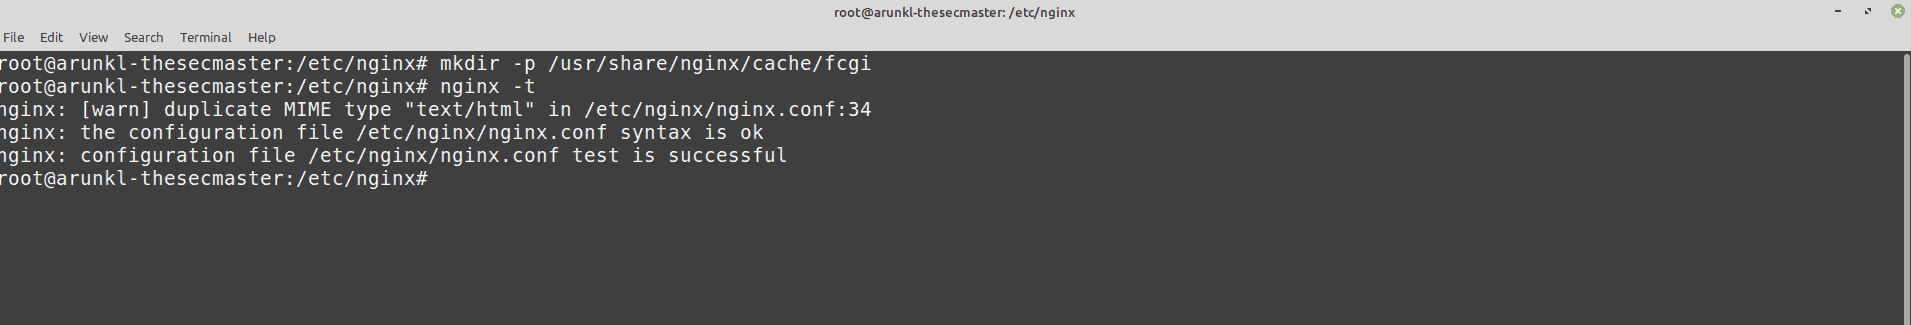 Create Casheing File And Test The Nginx Configurations